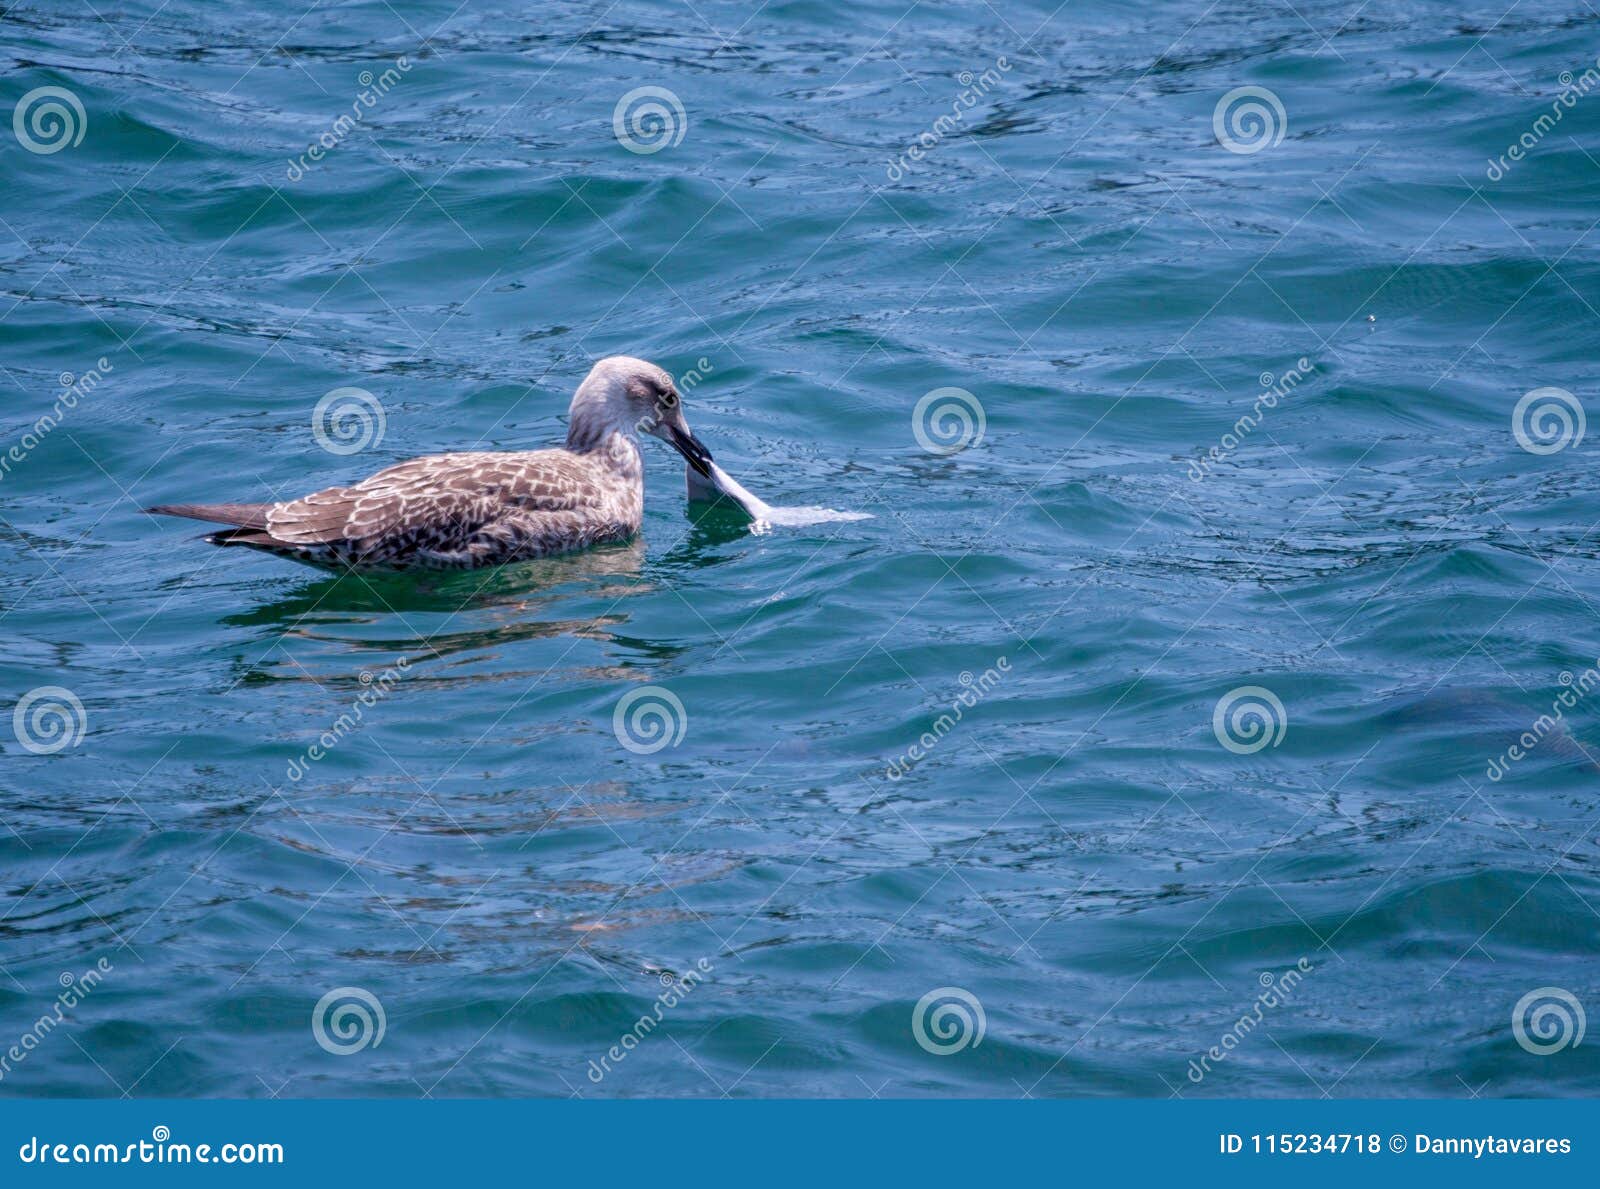 bird on the water eating a plastic bag